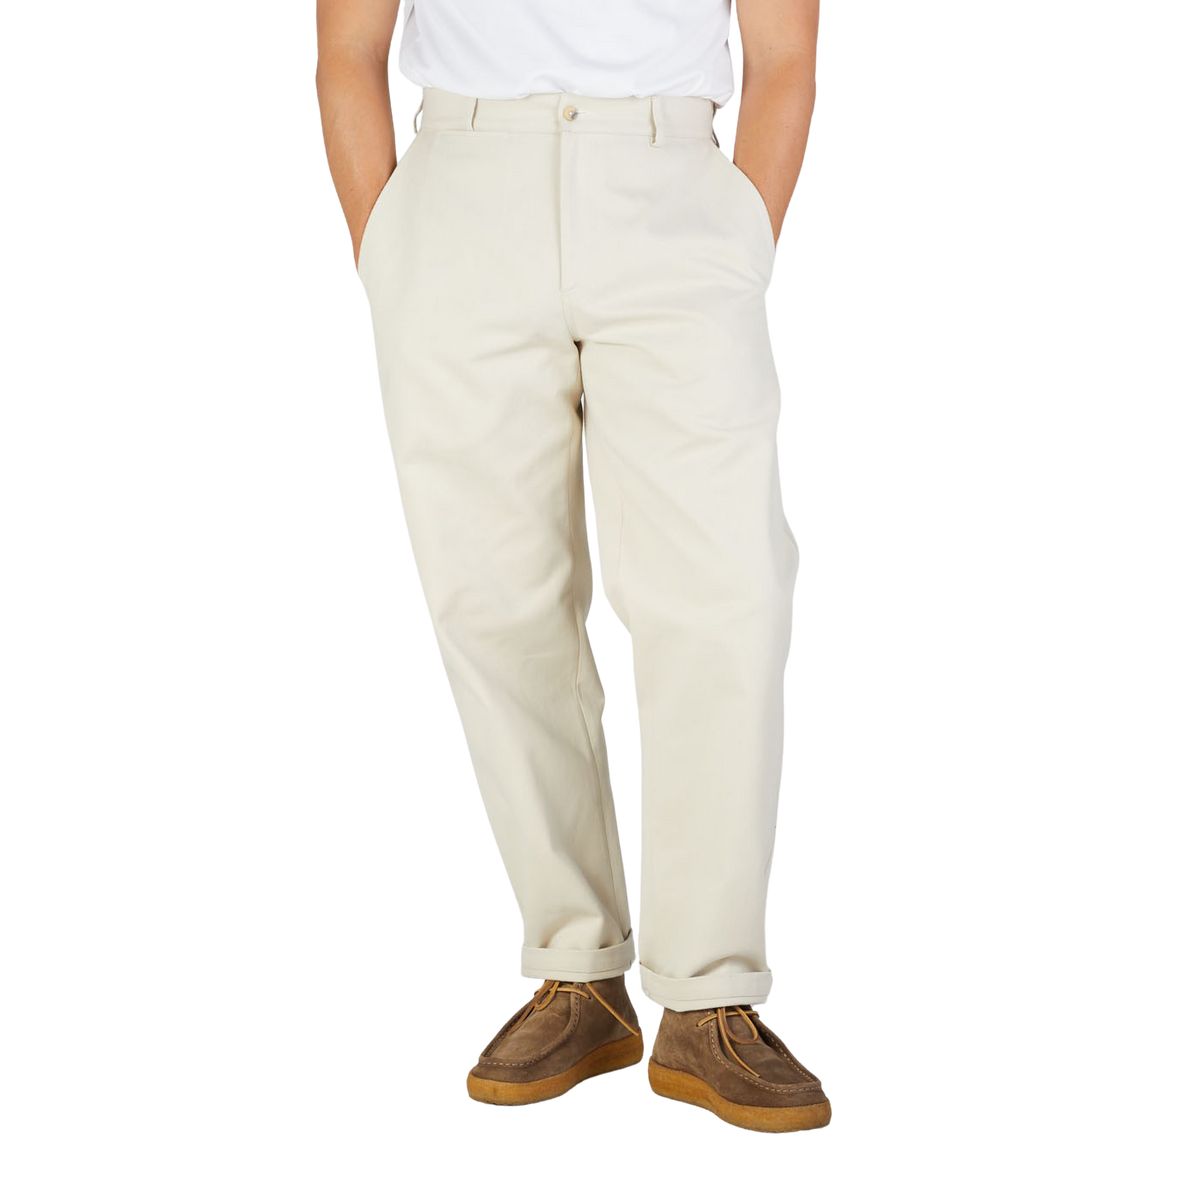 A close-up of a person wearing De Bonne Facture's Undyed Heavy Cotton Drill Balloon Trousers and brown suede shoes, standing against a plain background.